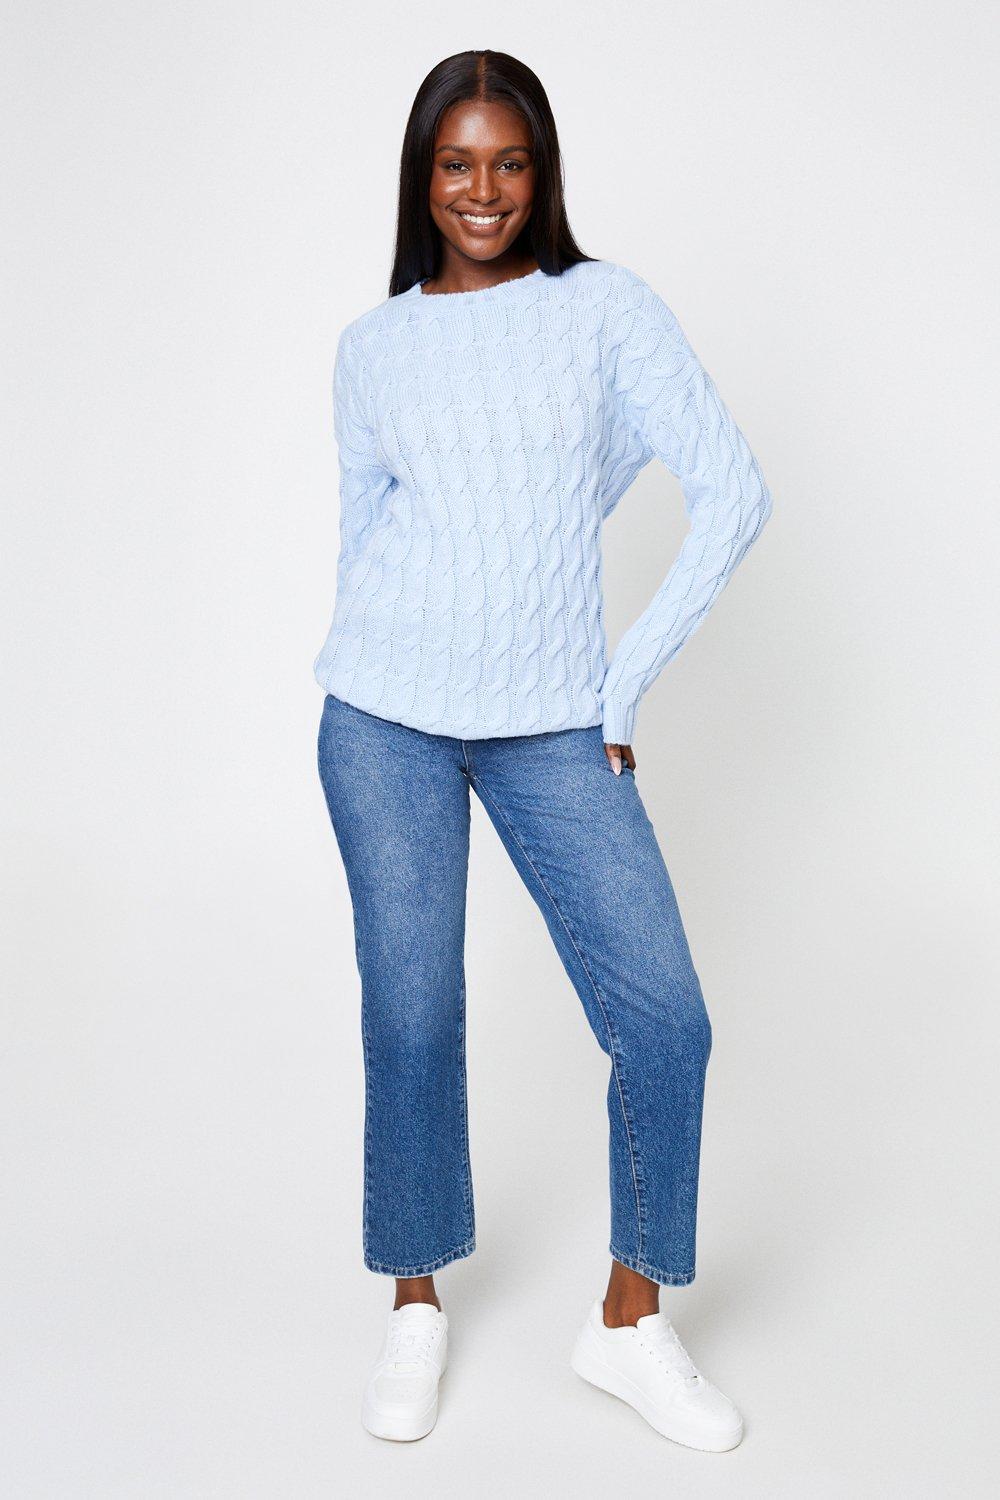 Women’s Long Sleeve Cable Knit Jumper - blue - XL